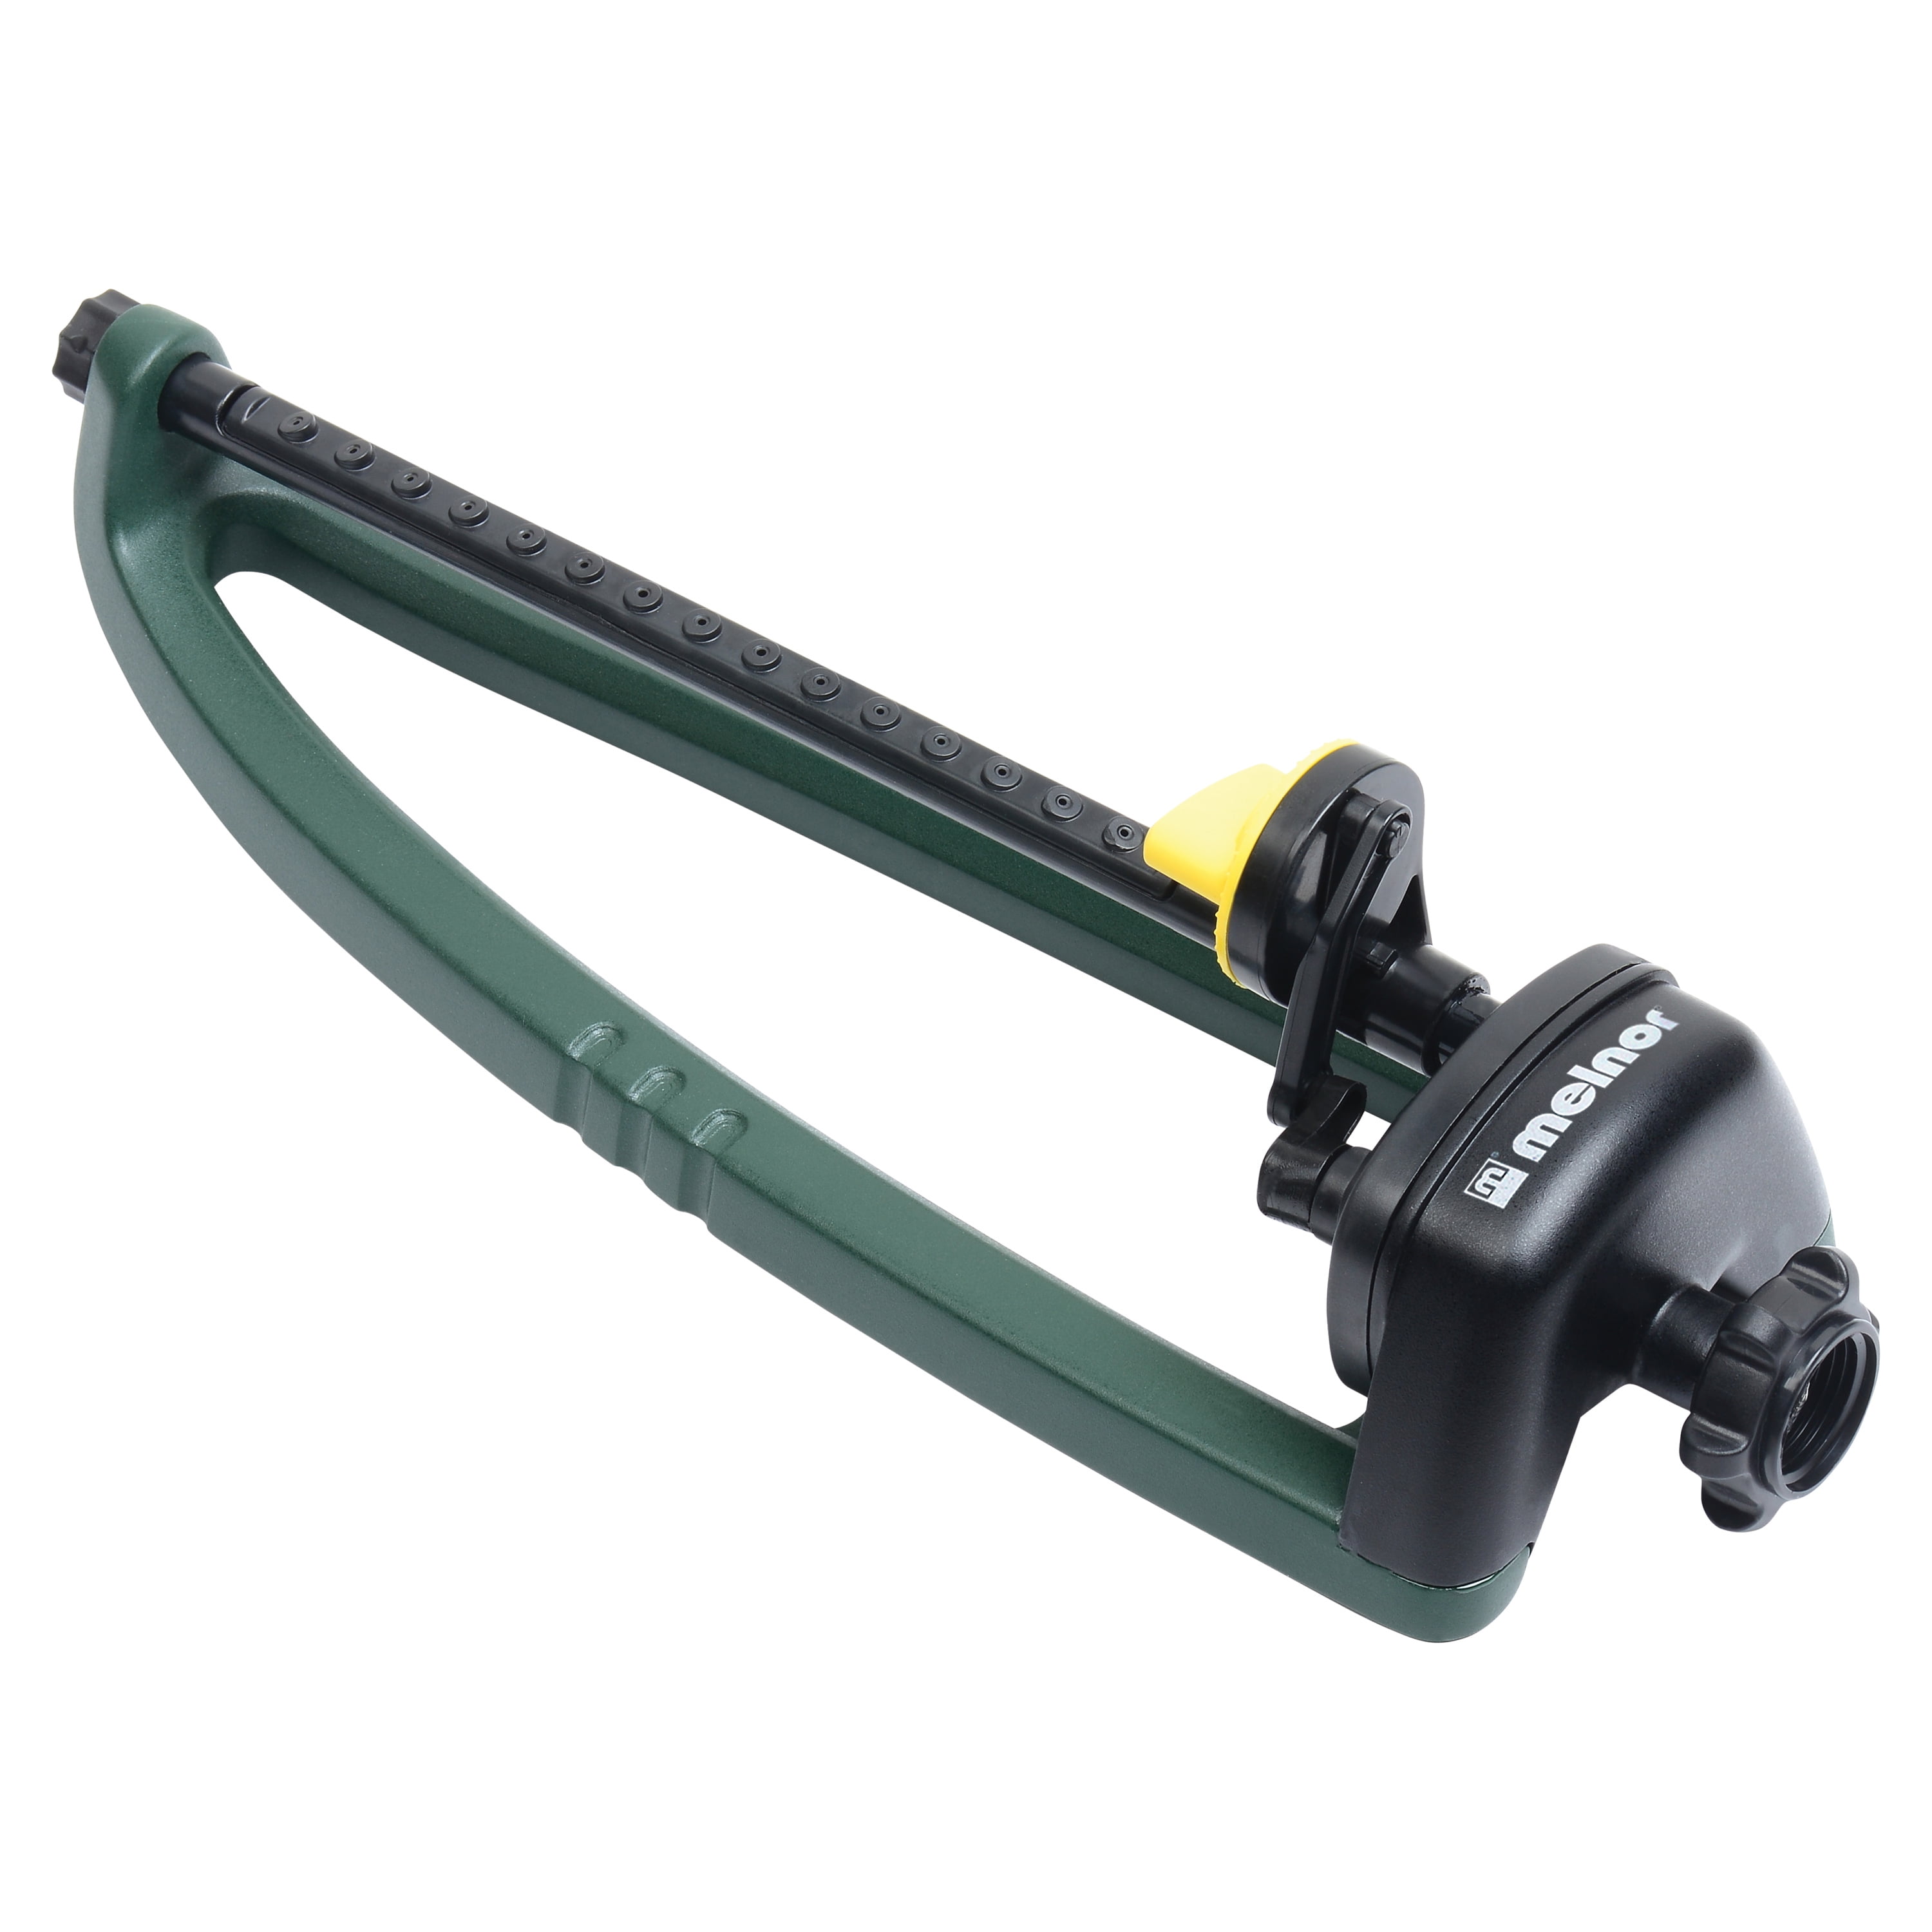 Black Melnor XT4100-IN XT Oscillating Lawn Sprinkler with Width and Range Control Waters up to 4,200 sq.ft